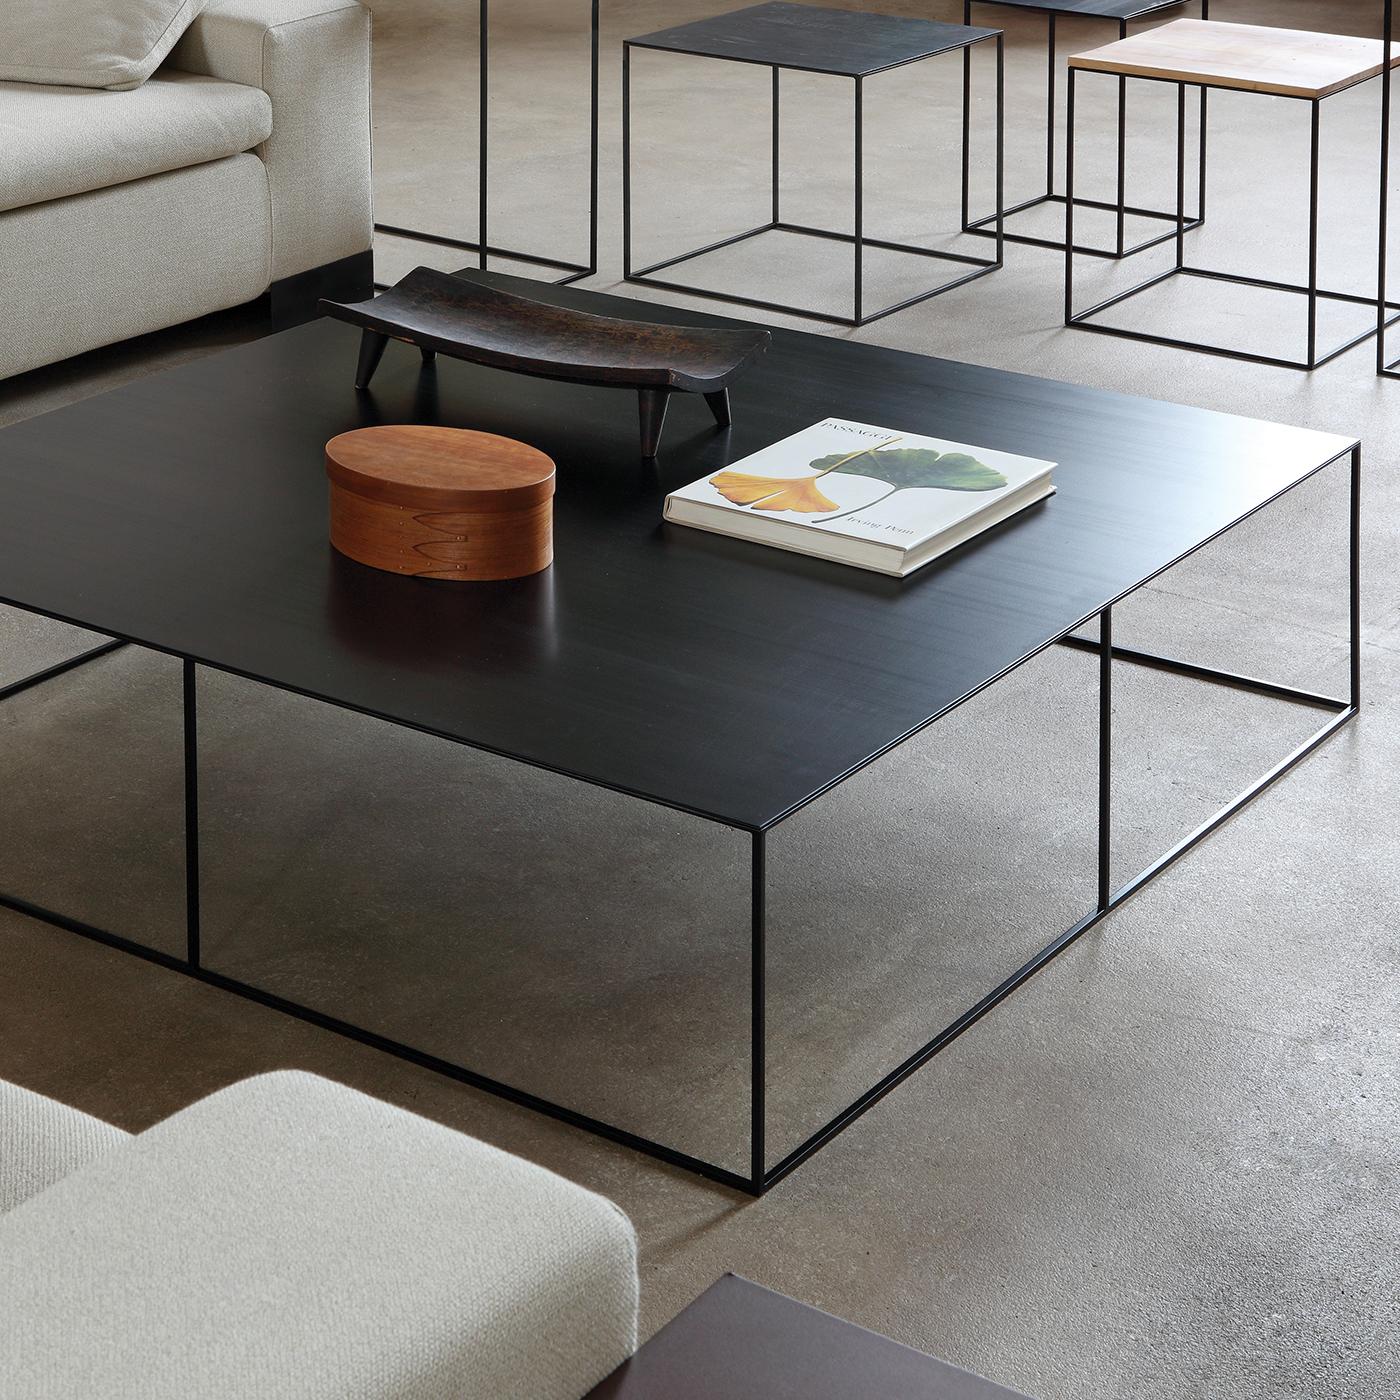 Ultra-slim volumes arranged in an airy and utterly minimalist silhouette lend this coffee table its untamable restrained elegance. An impeccable solution to complement a wide variety of contemporary living spaces, its frame crafted of steel wire